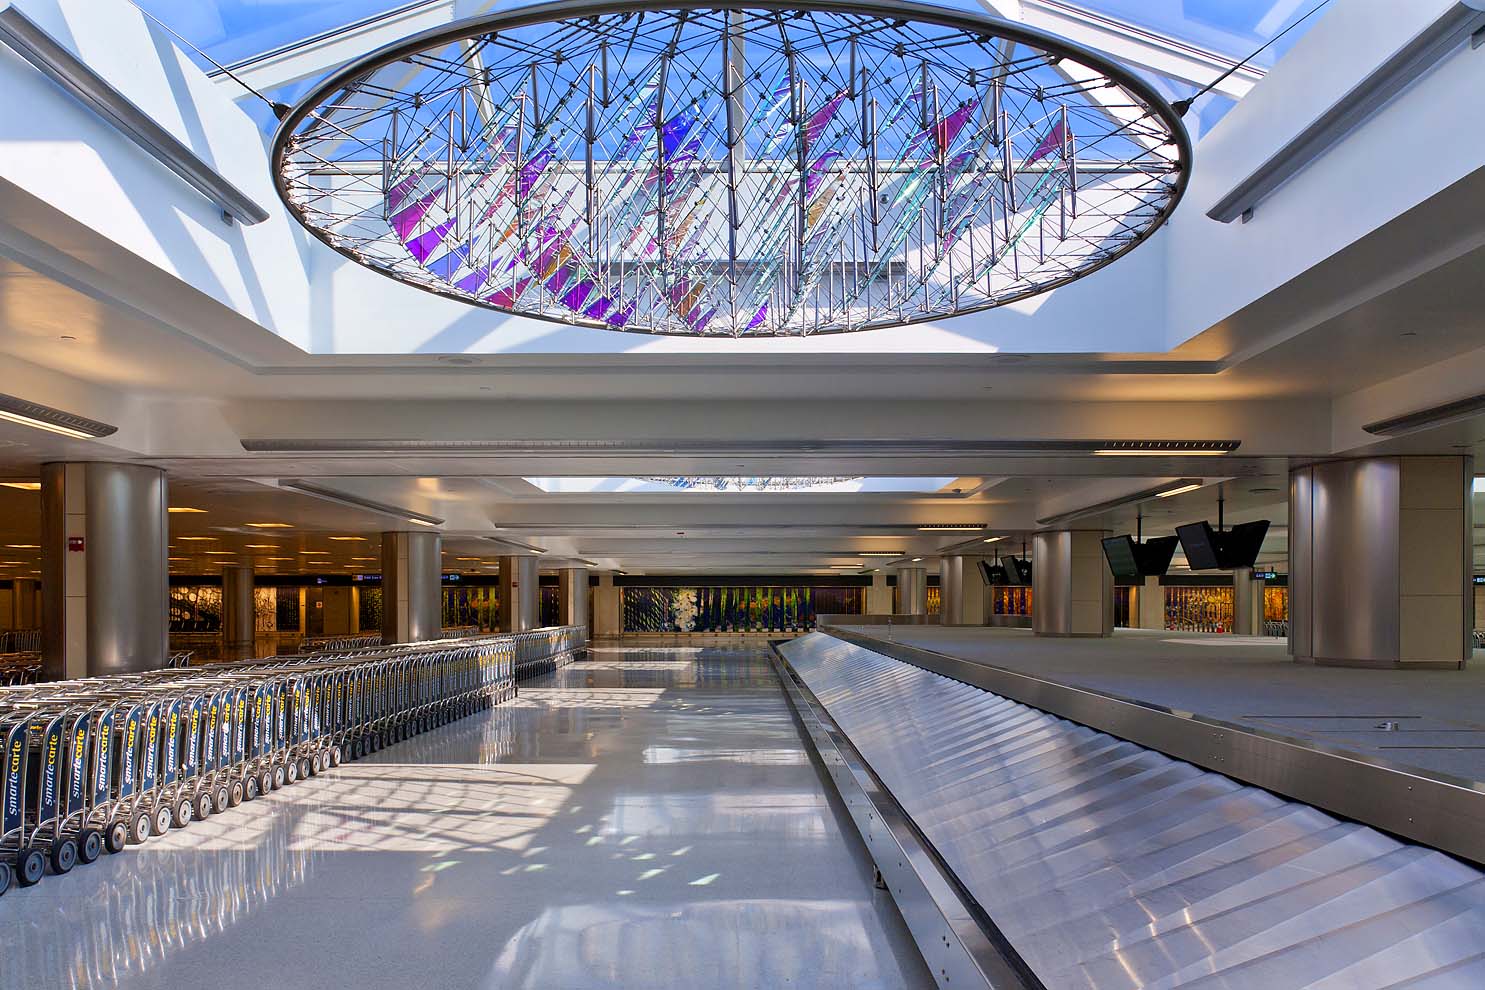 dichroic glass sculpture in skylight next to baggage carousel